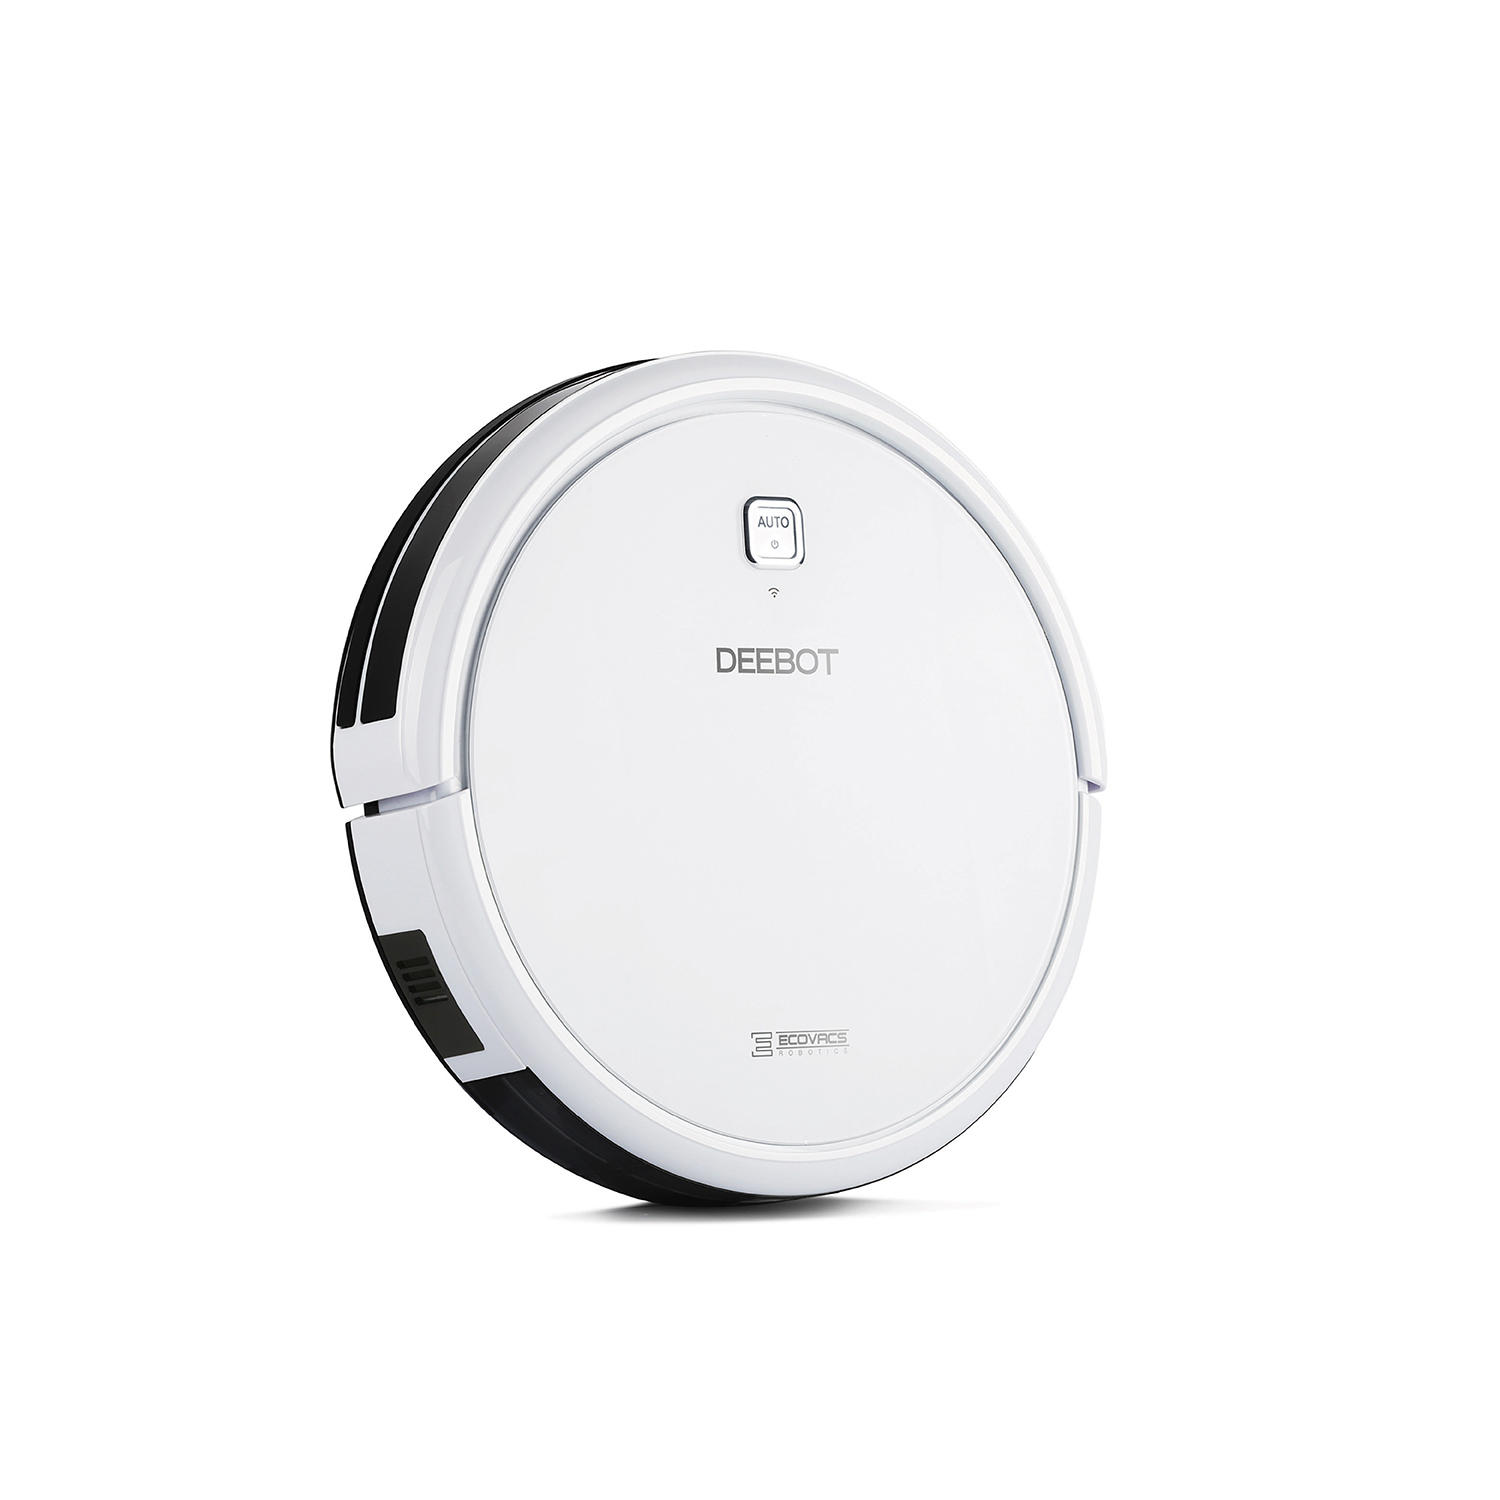 Ecovacs Deebot N79W Robot Vacuum Cleaner with 3-Stage Cleaning System